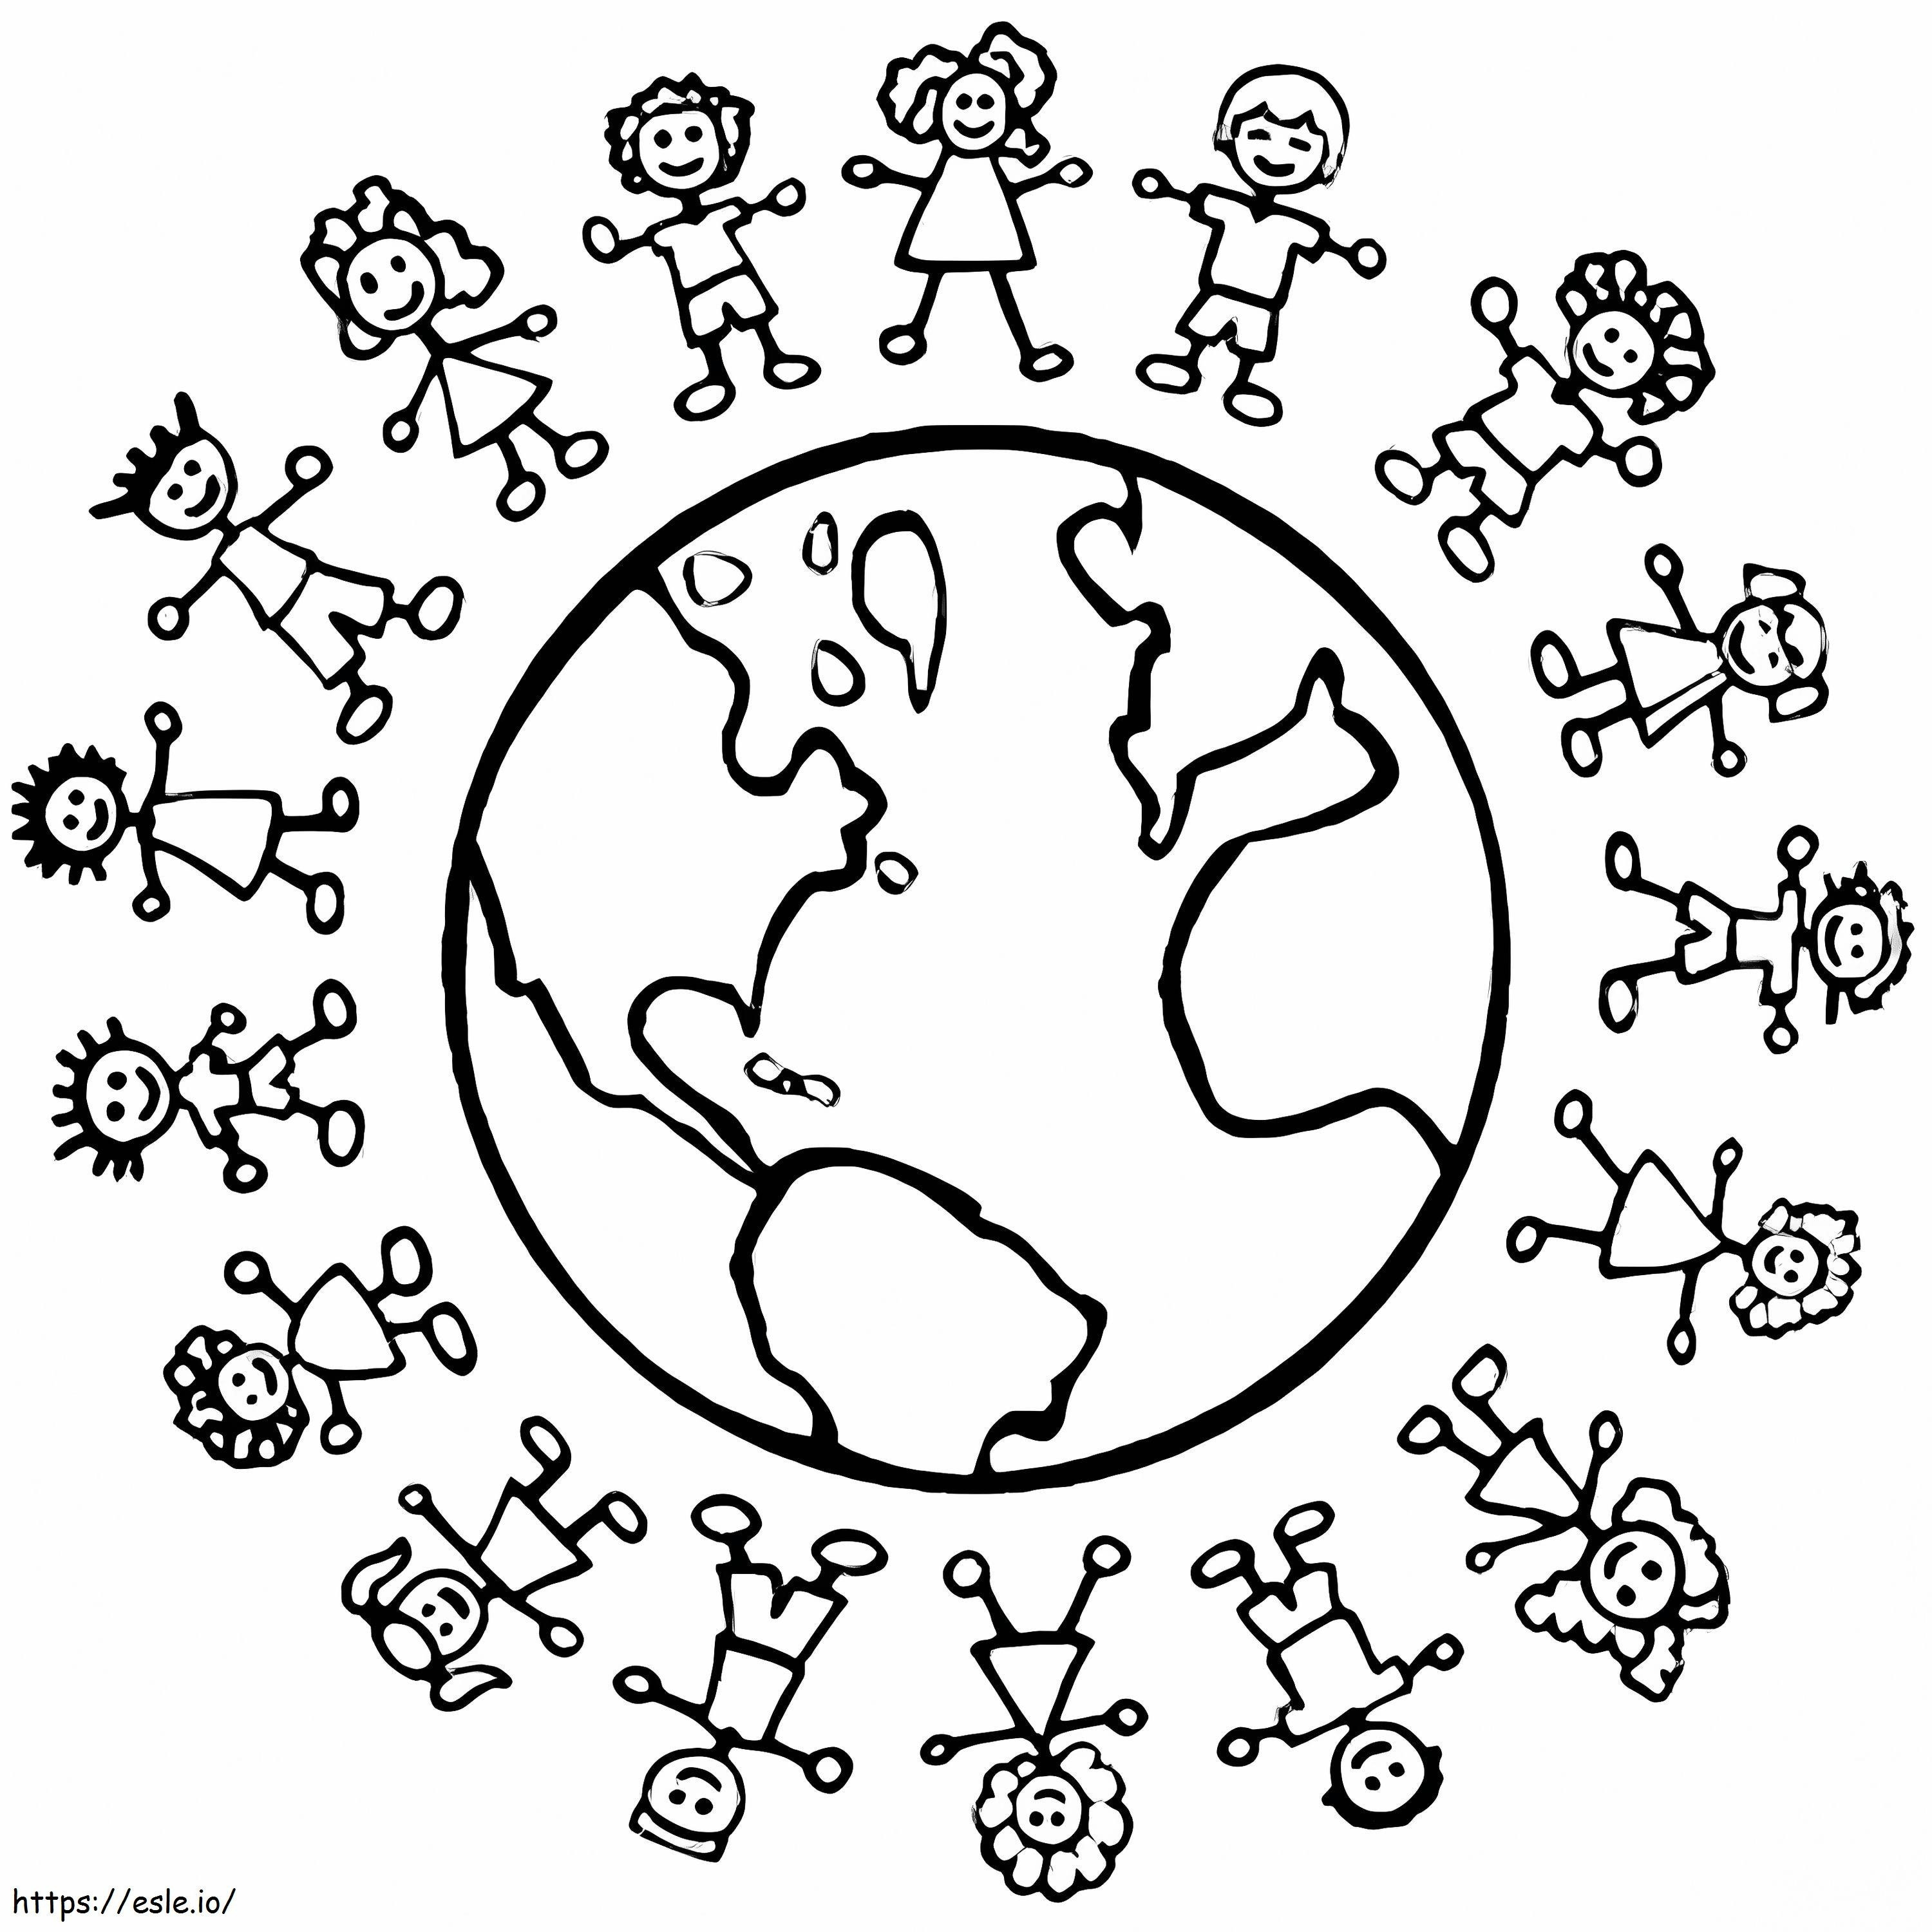 Childrens Day coloring page